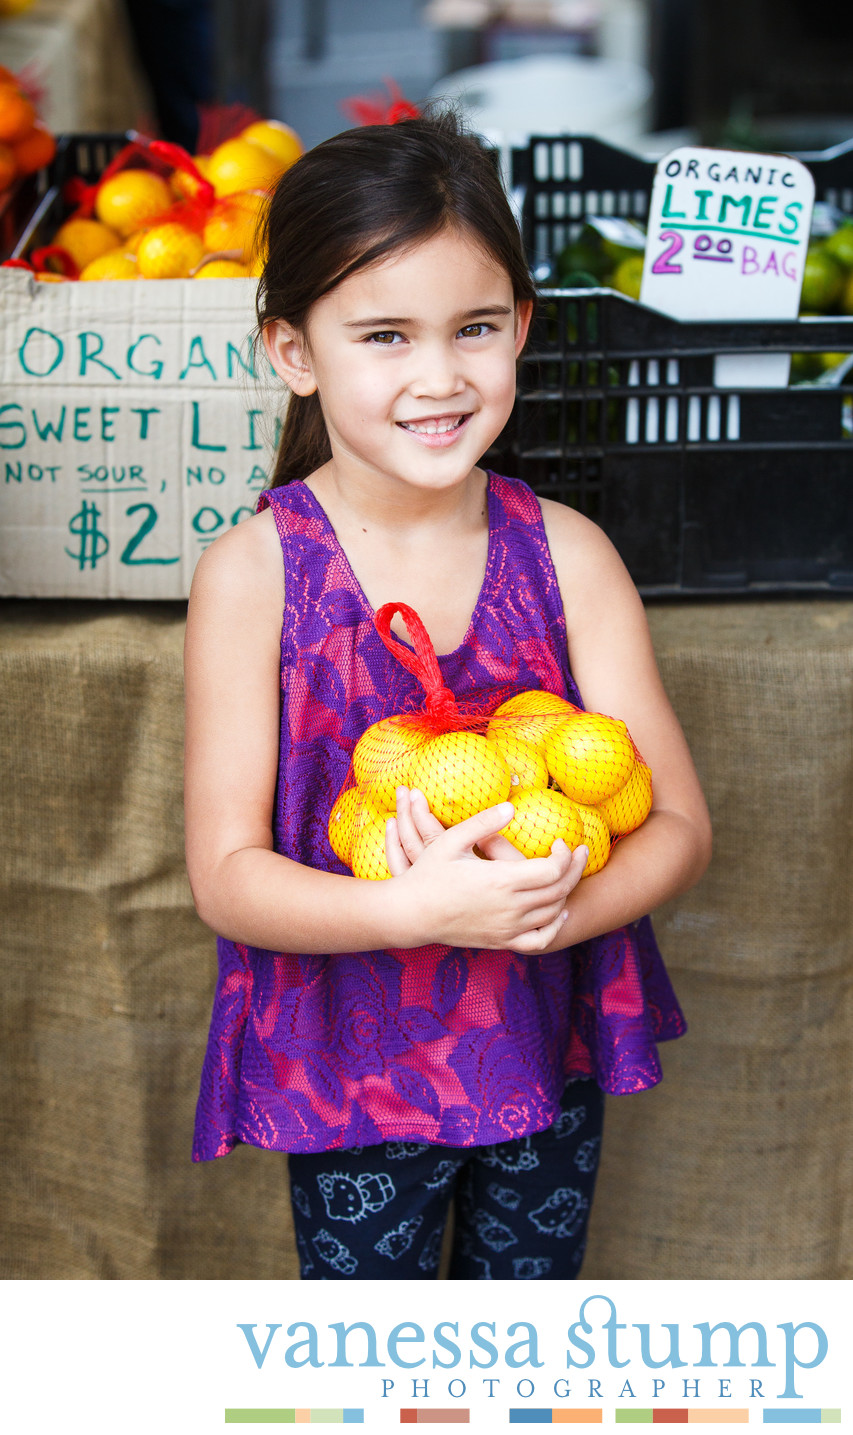 Smiling portrait of young girl at a farmers market holding lemons